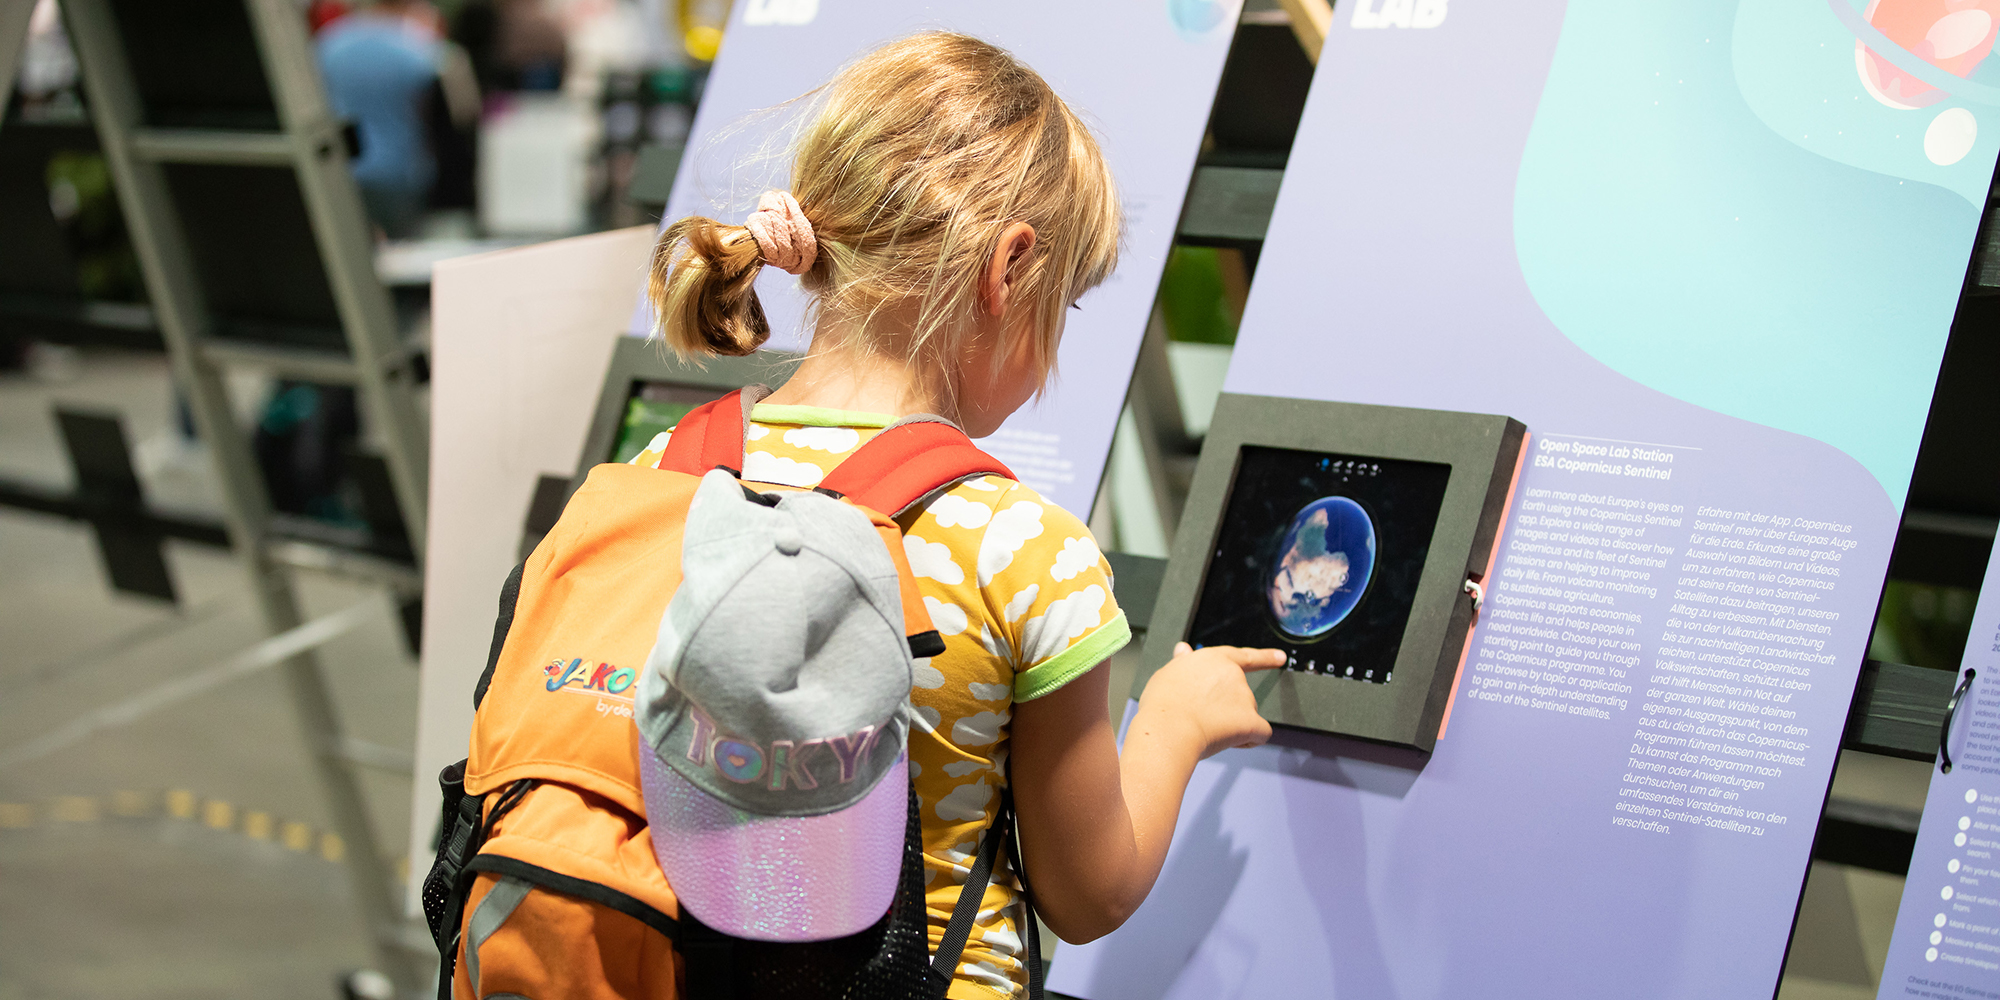 child in front of a tousch screen showing planet earth